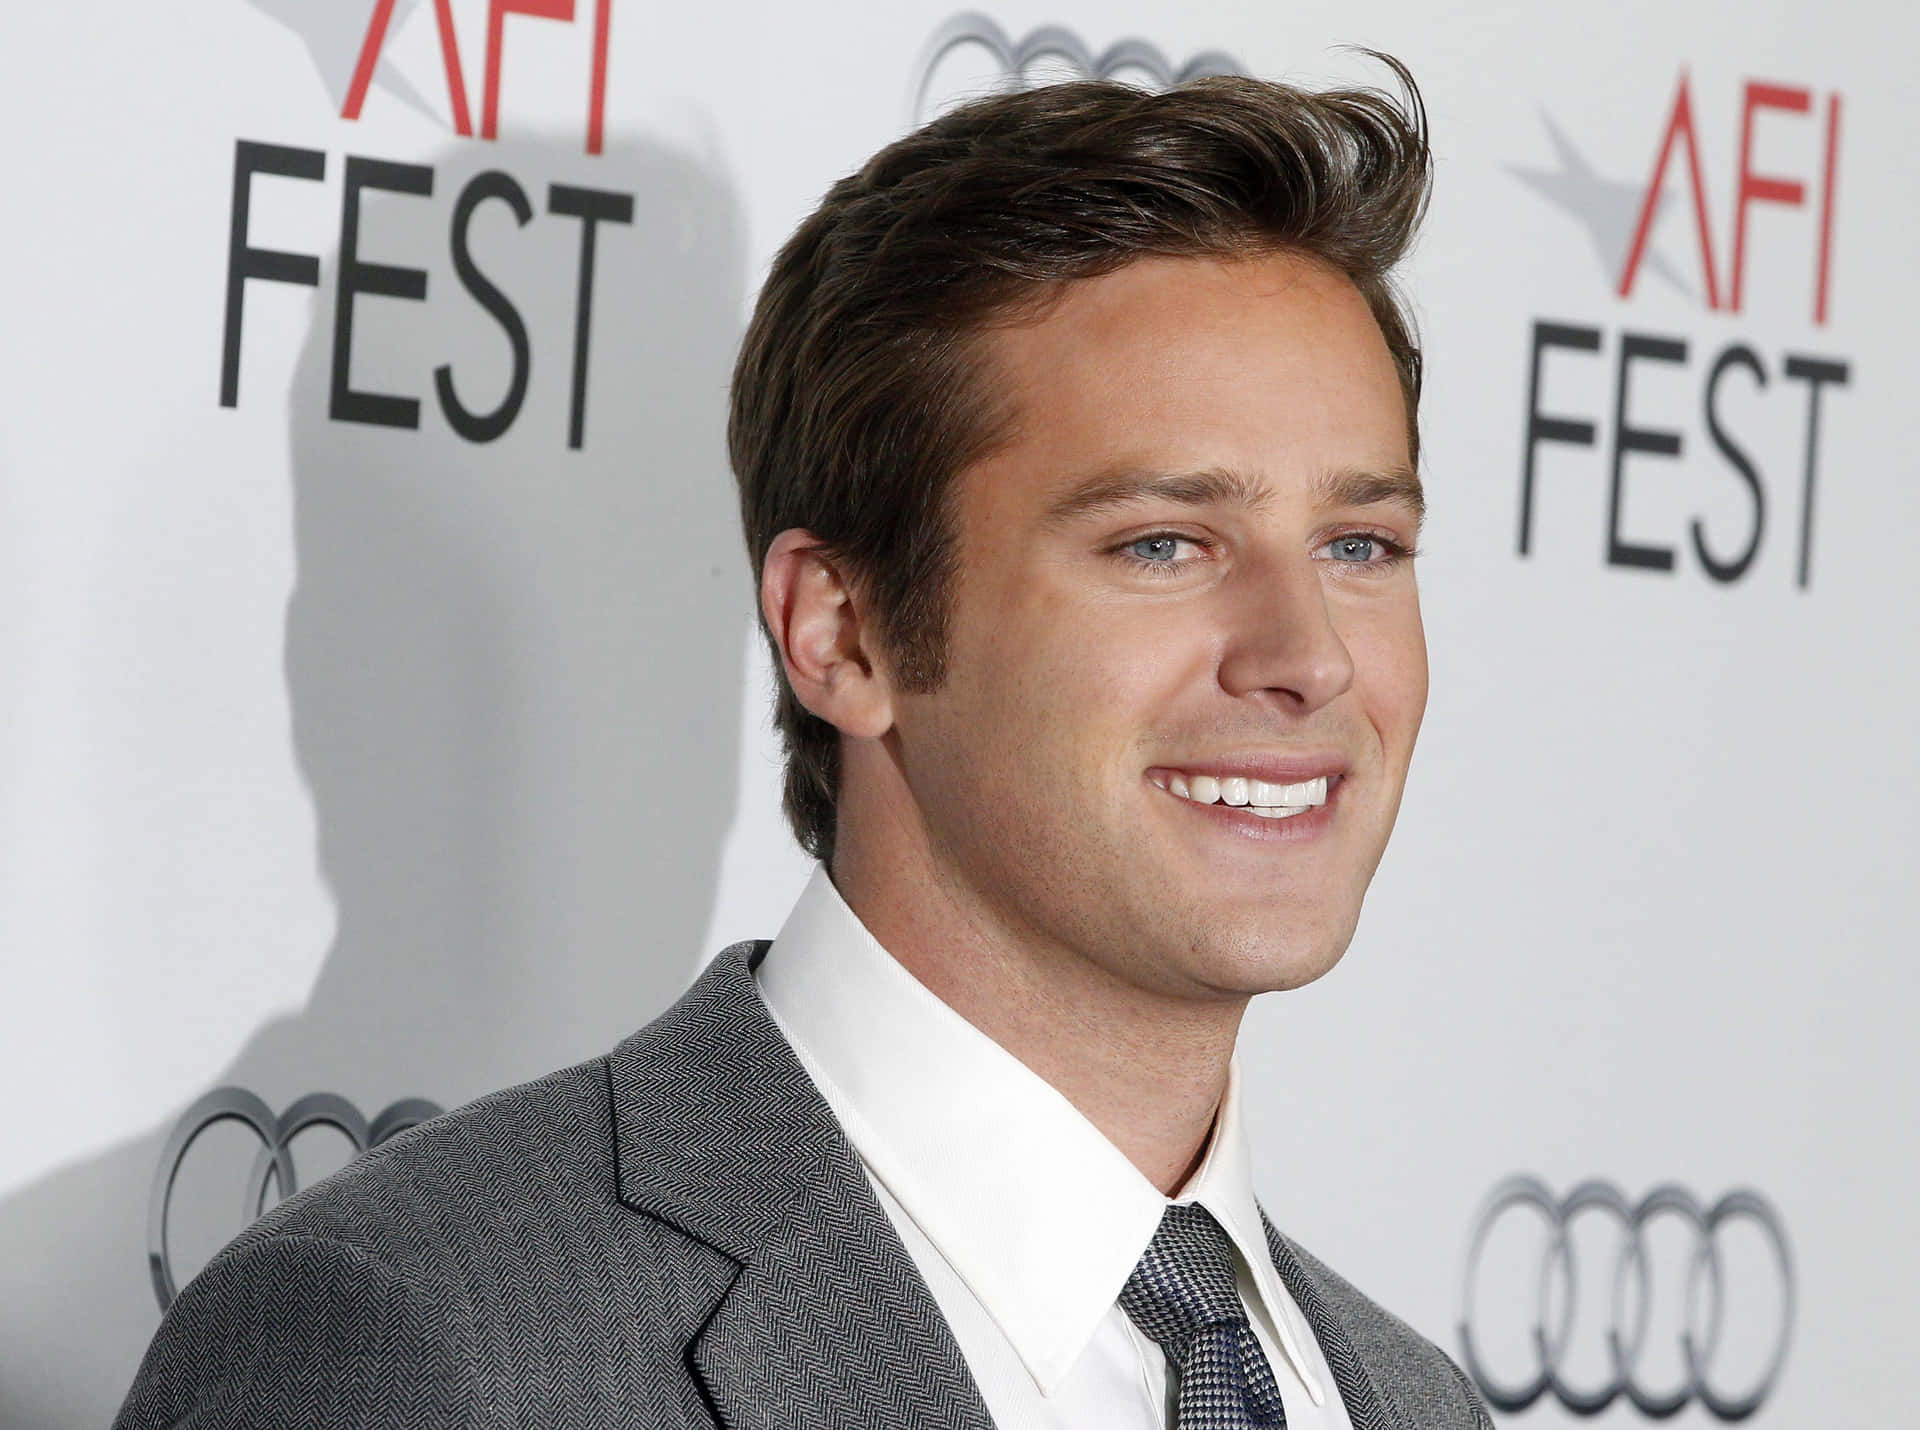 Actor Armie Hammer looks sharp in his dress suit.